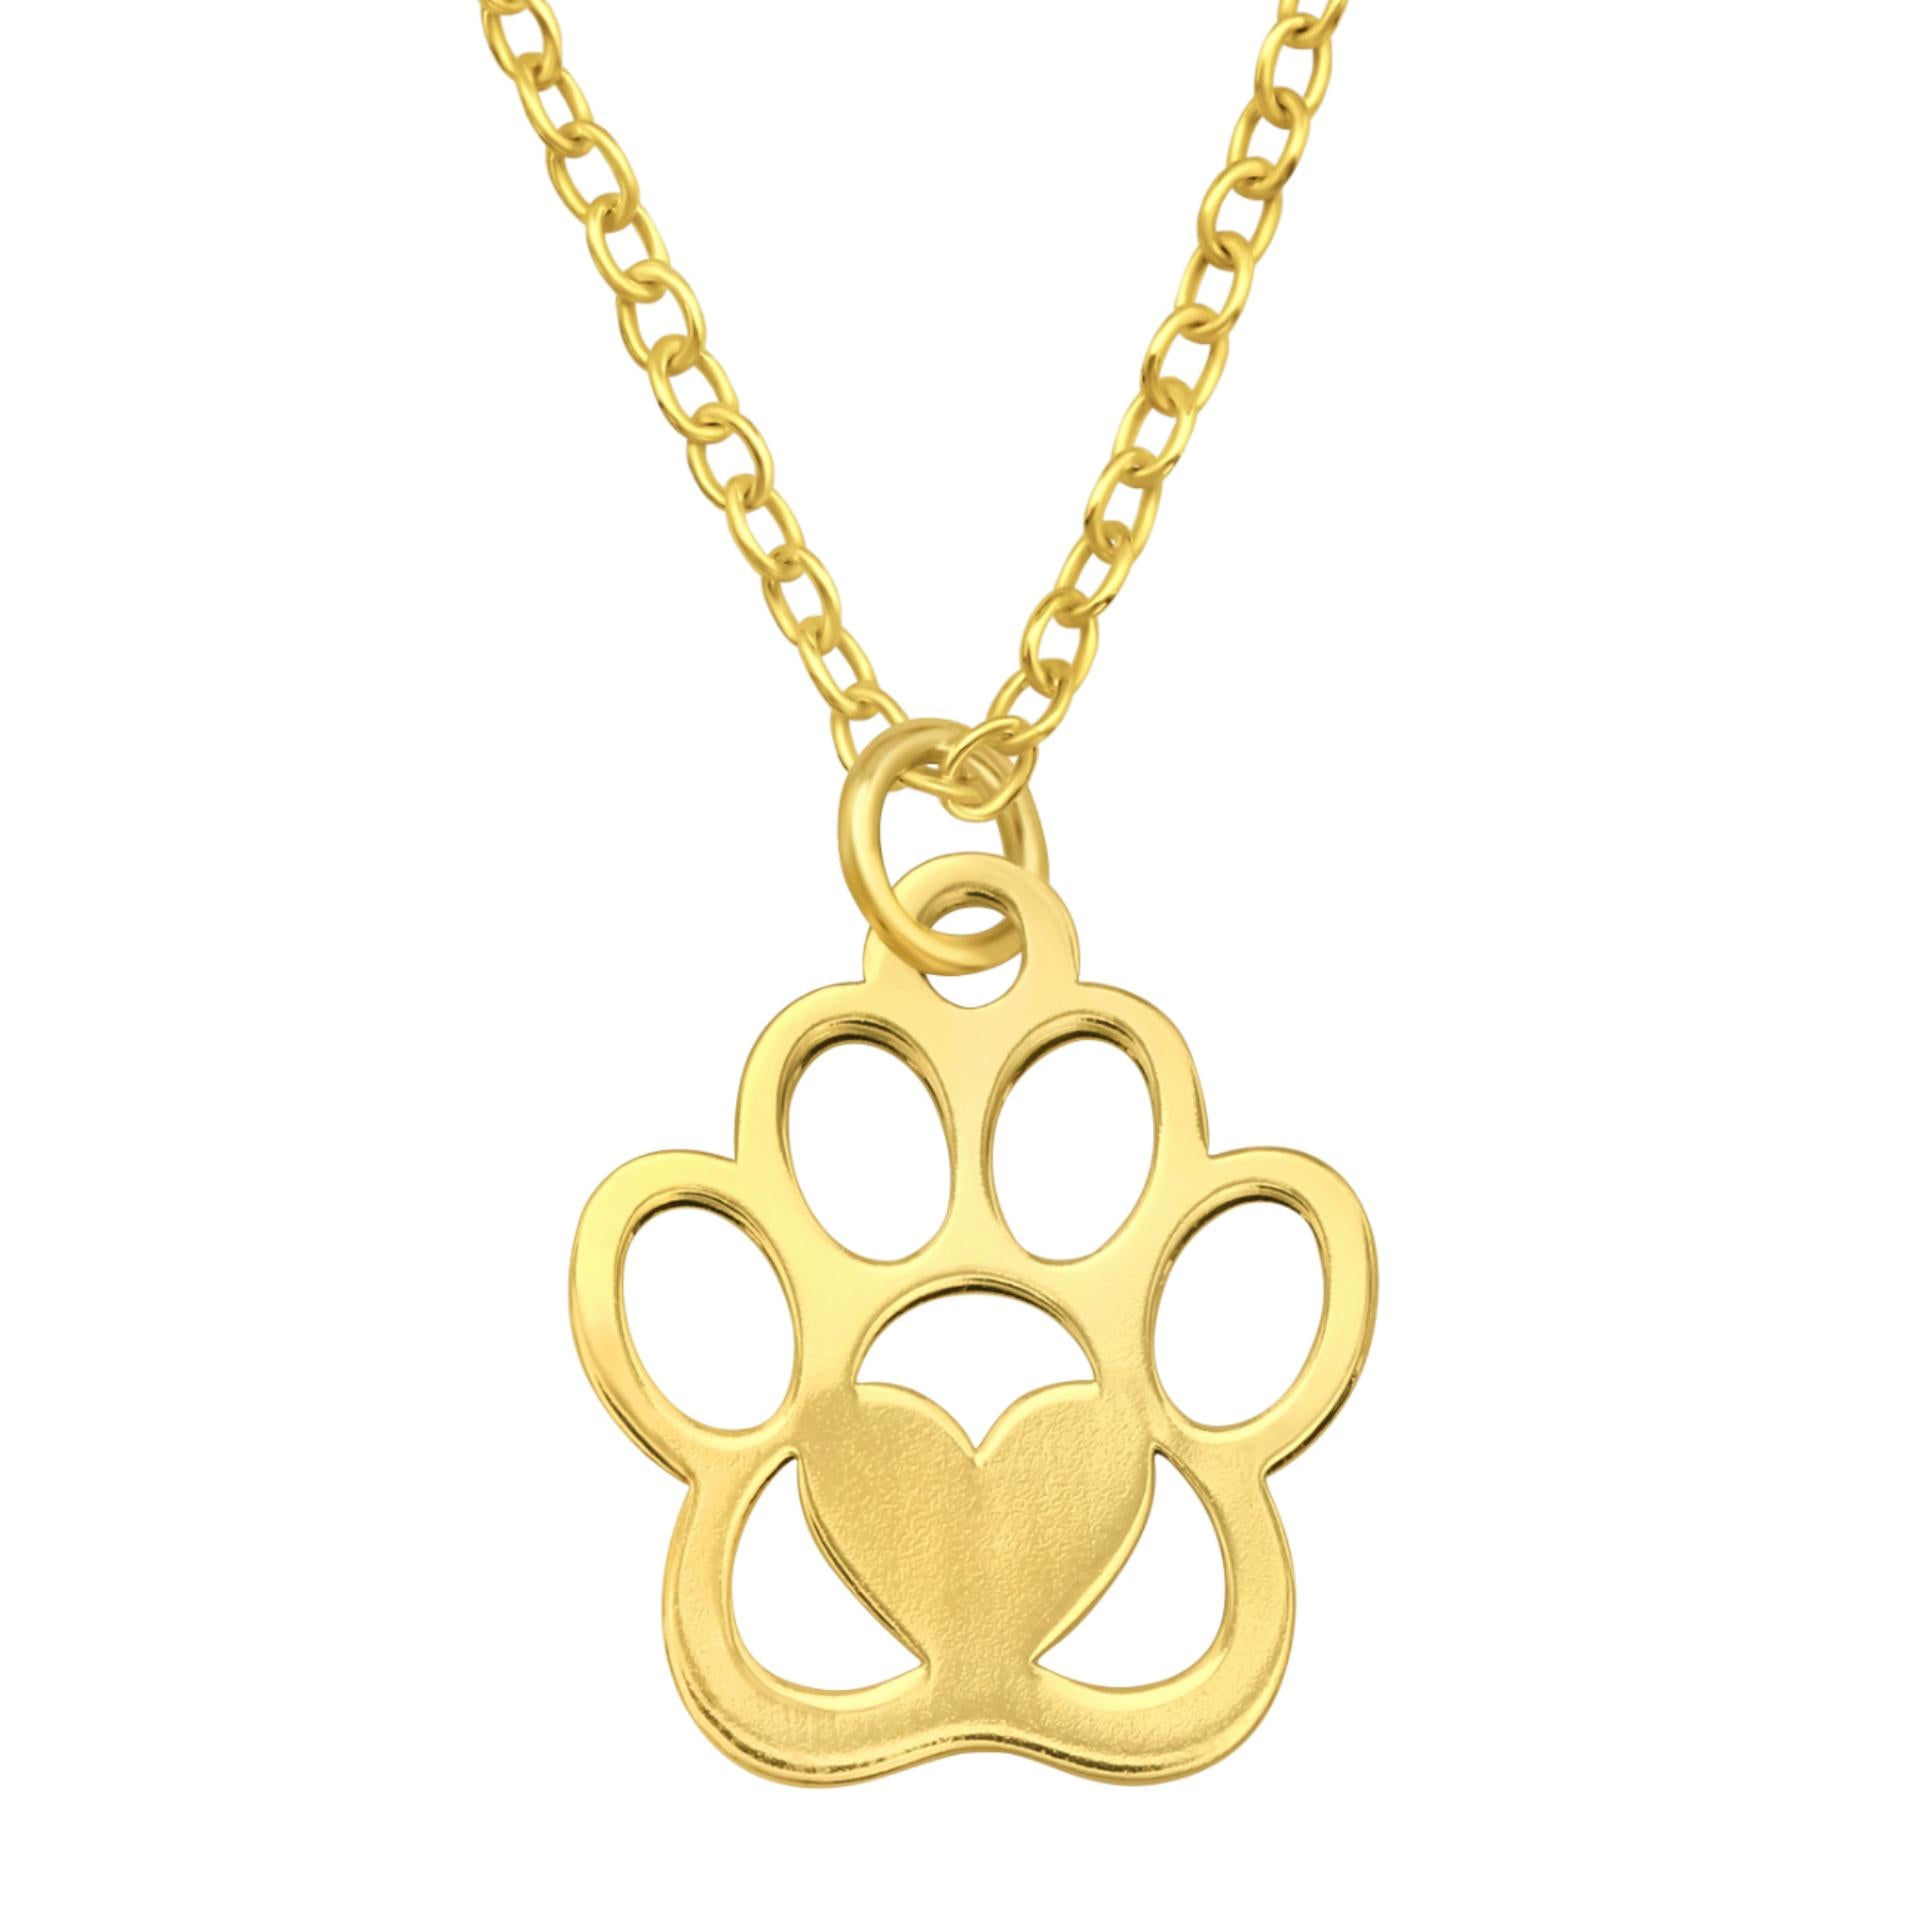 24k Gold Plated Sterling Silver Paw Print Heart Necklace